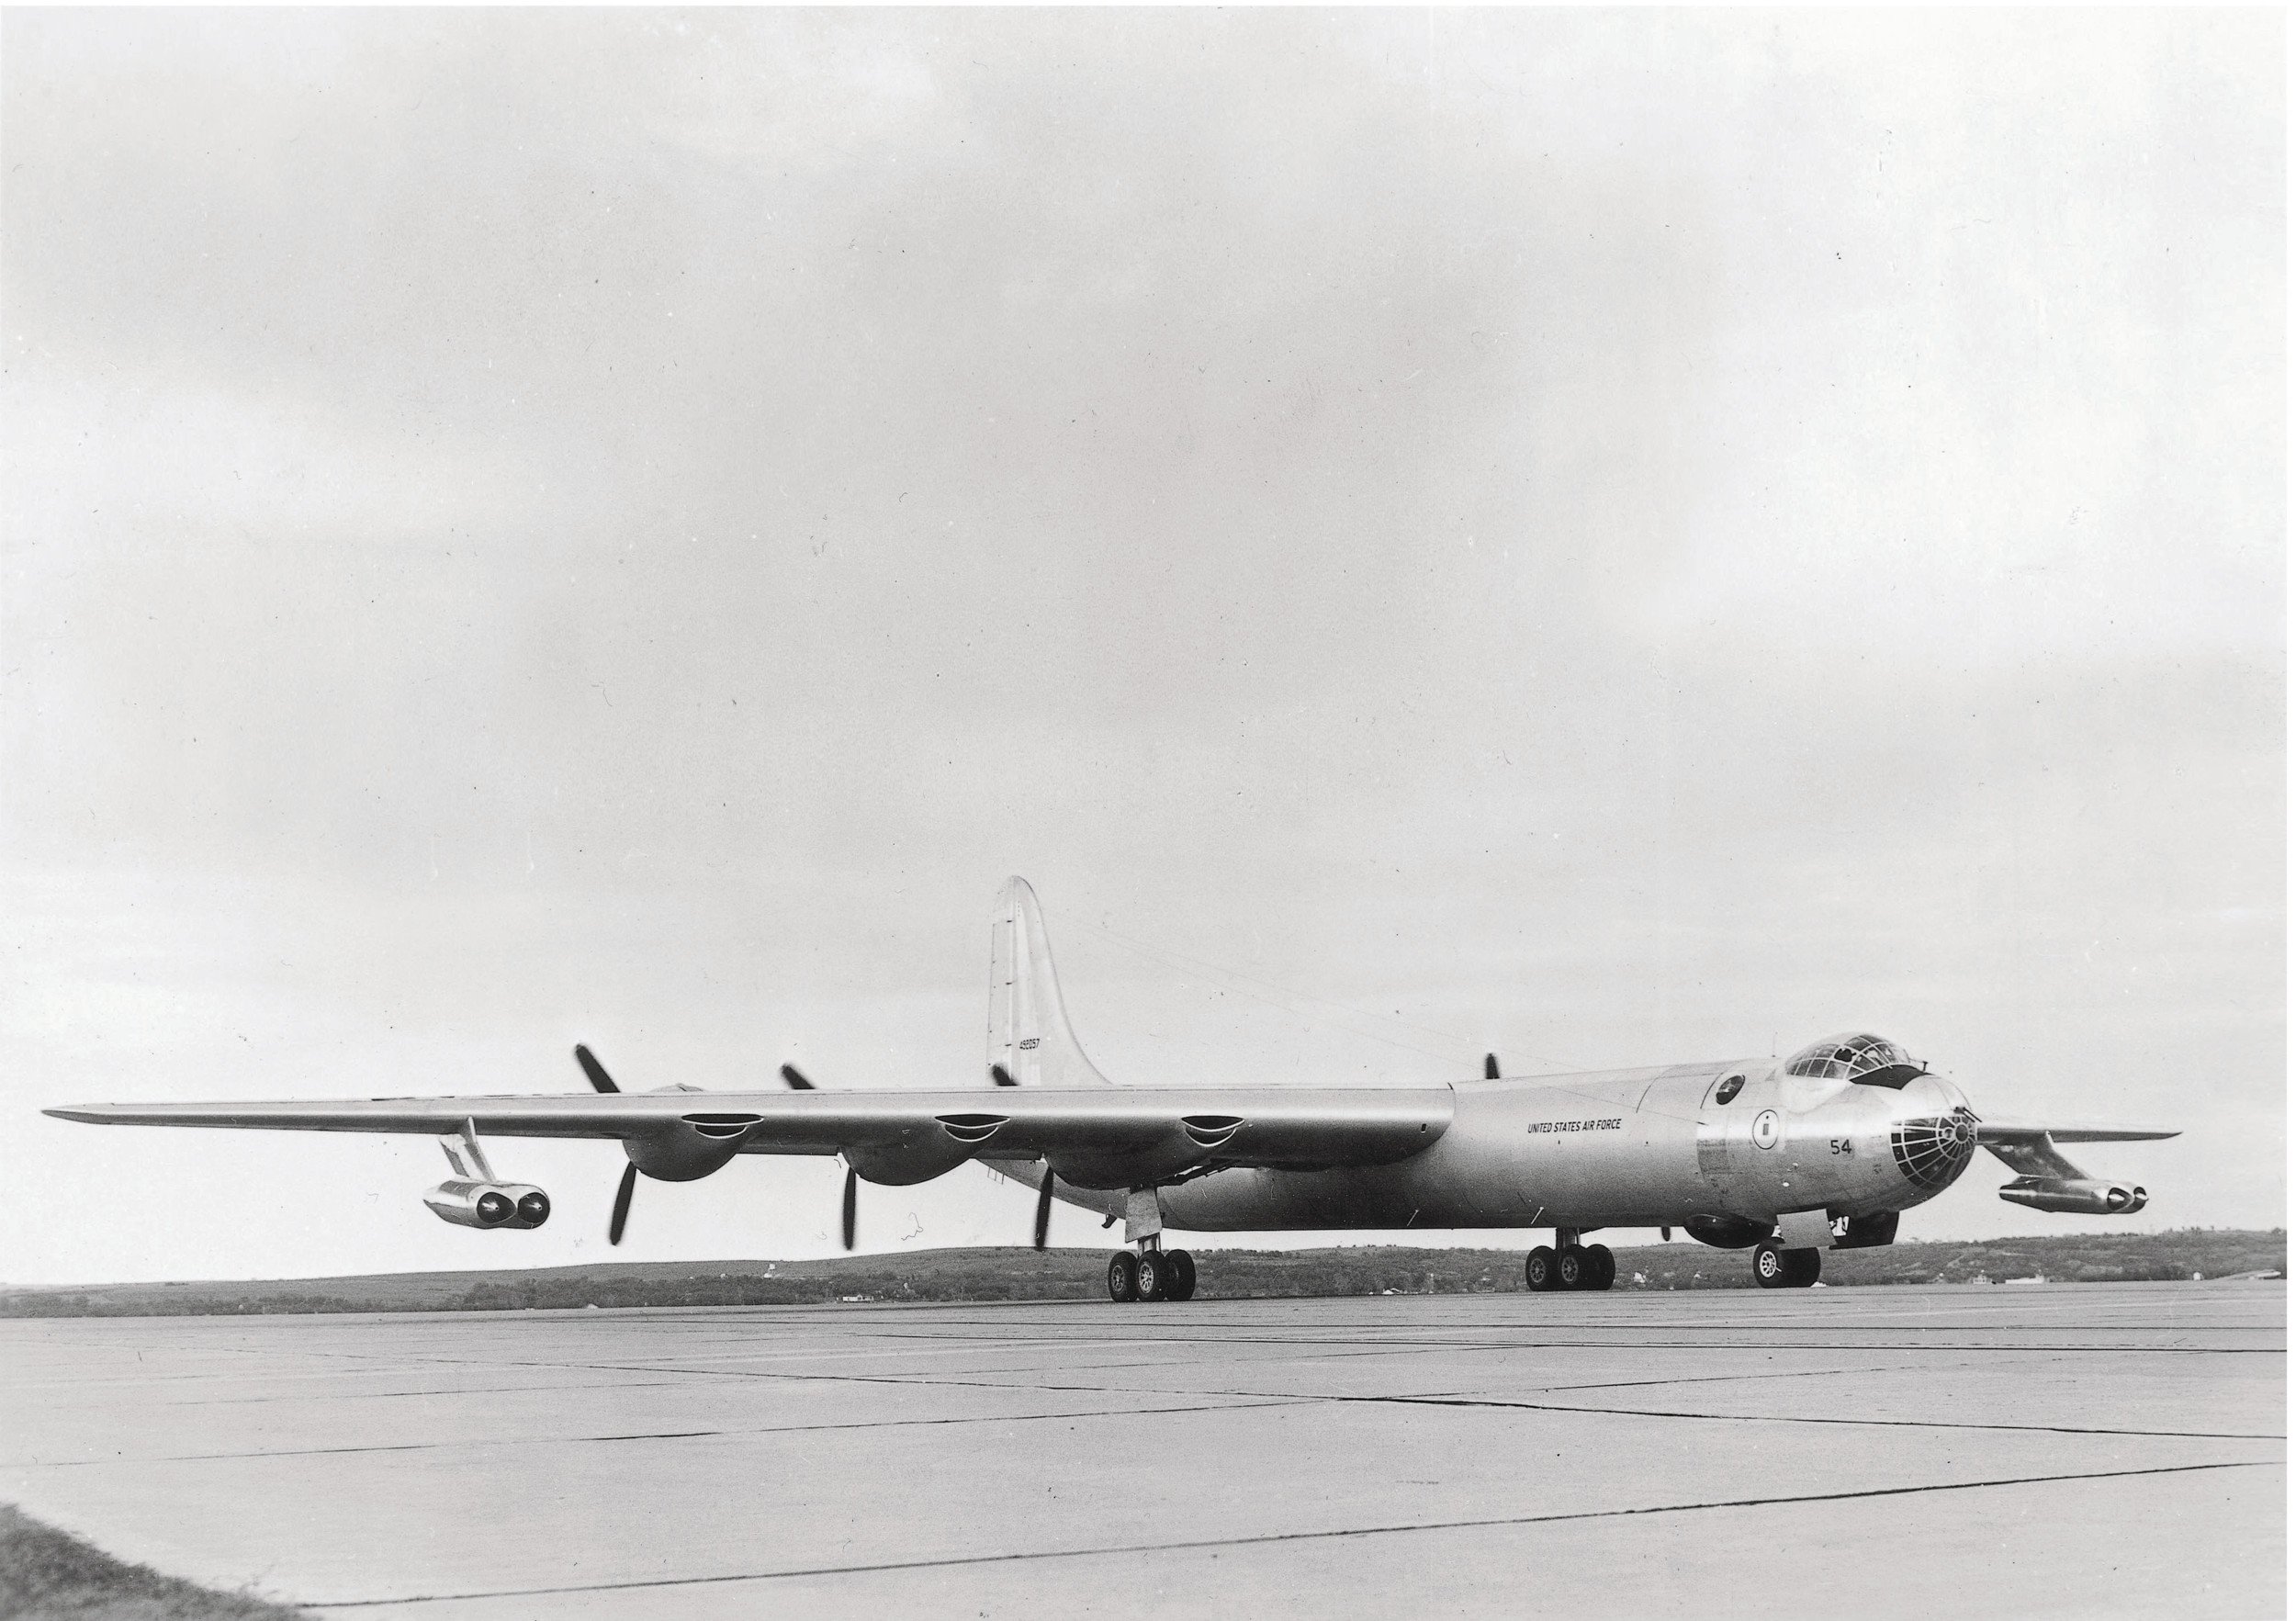 B-36: Bomber at the Crossroads, Air & Space Magazine